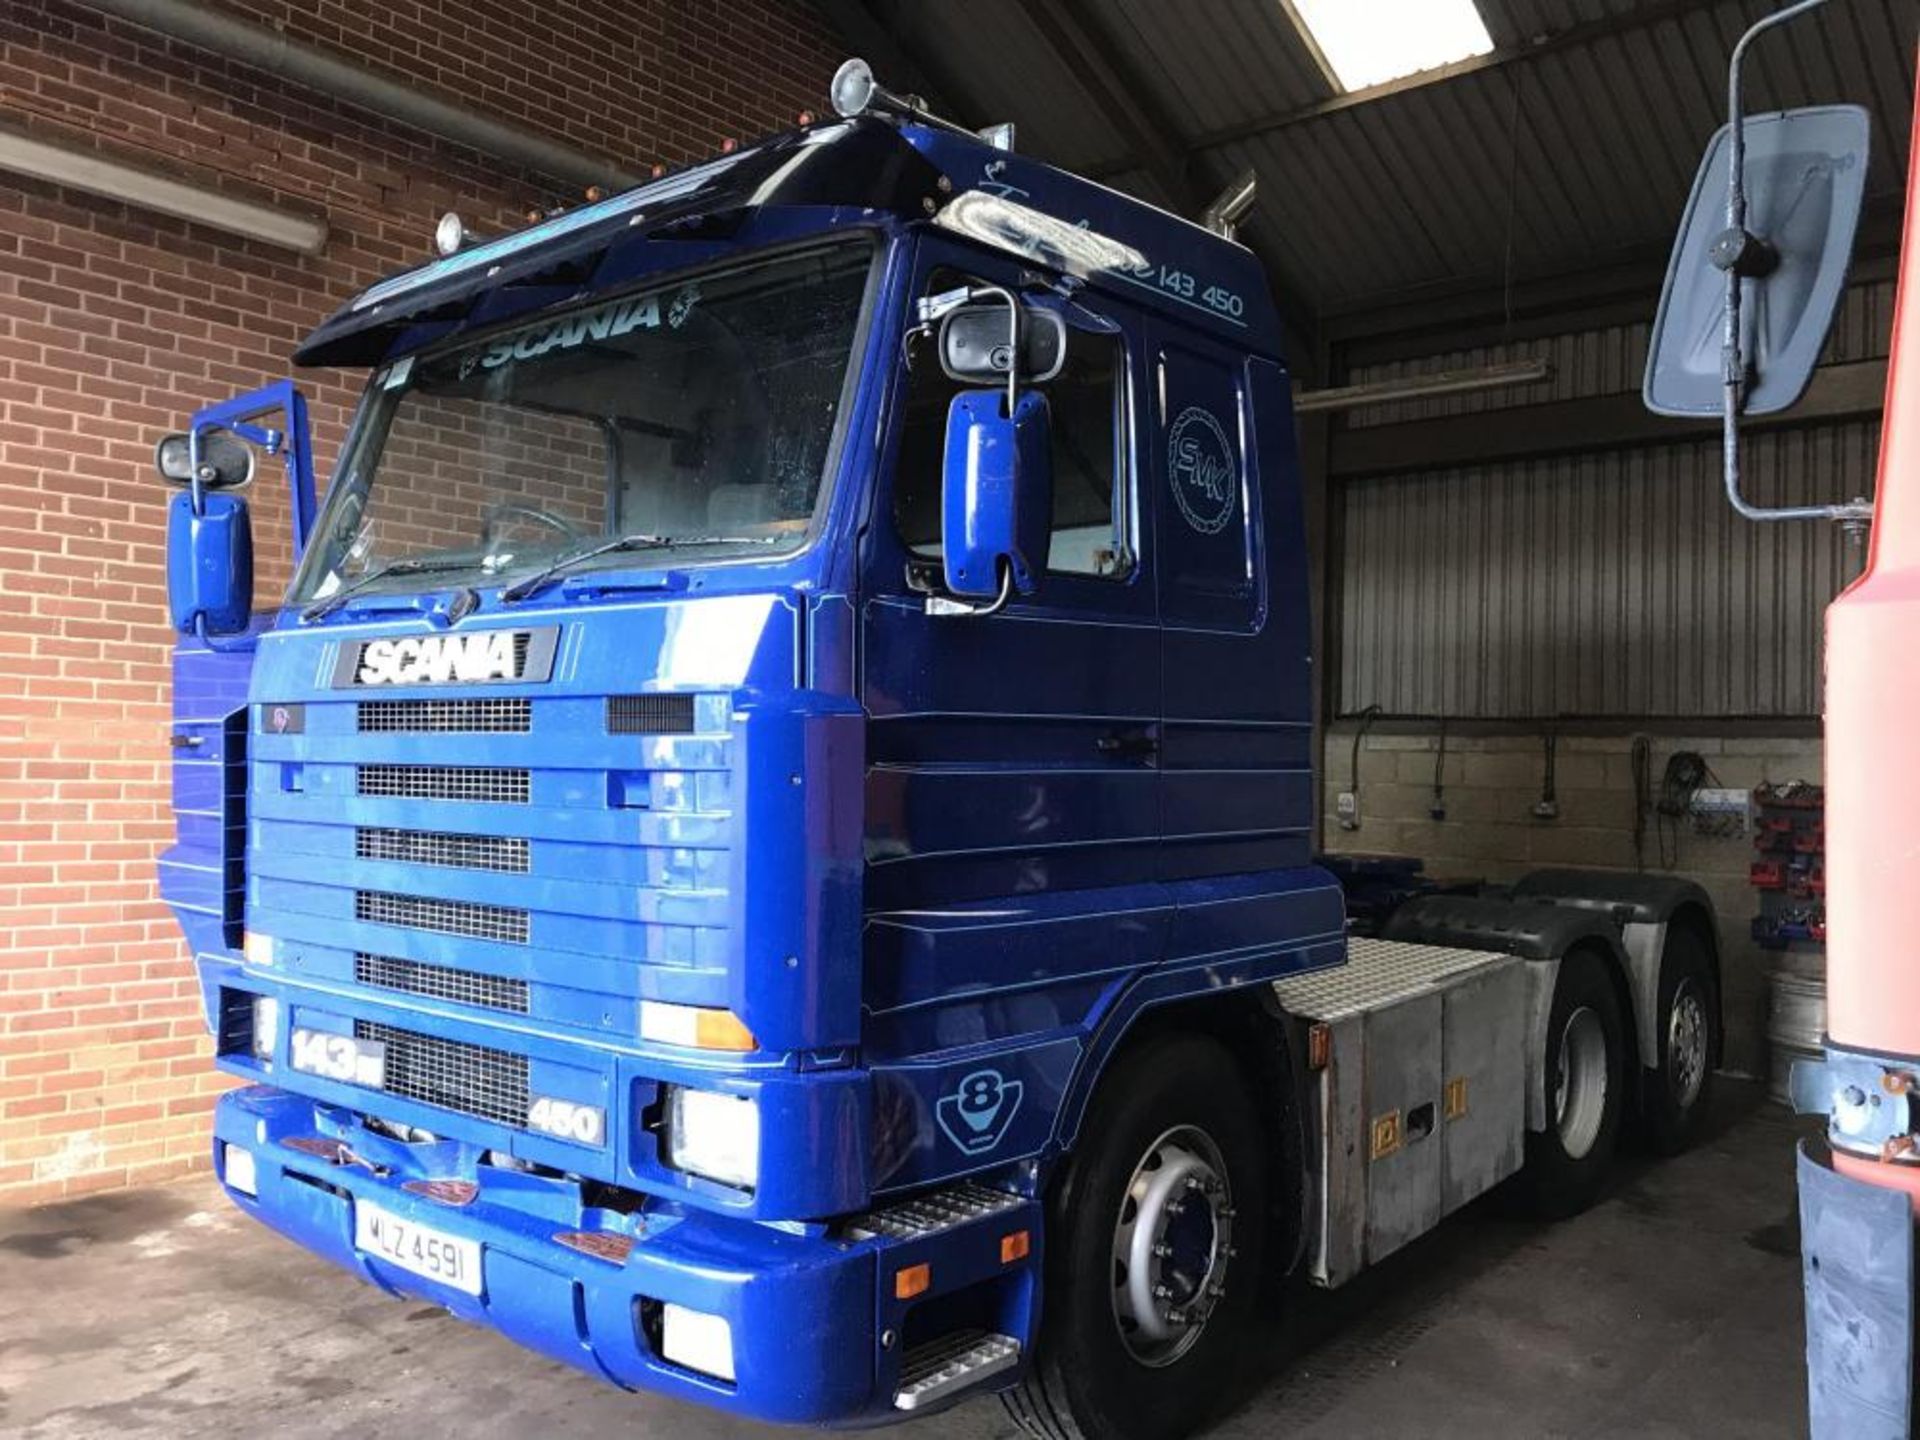 1996 SCANIA 143 450 TAG AXLE TOP LINE STREAM LINE 6X2 TRACTOR UNIT V8 GRS 900 GEARBOX GOOD RUNNER - Image 2 of 31